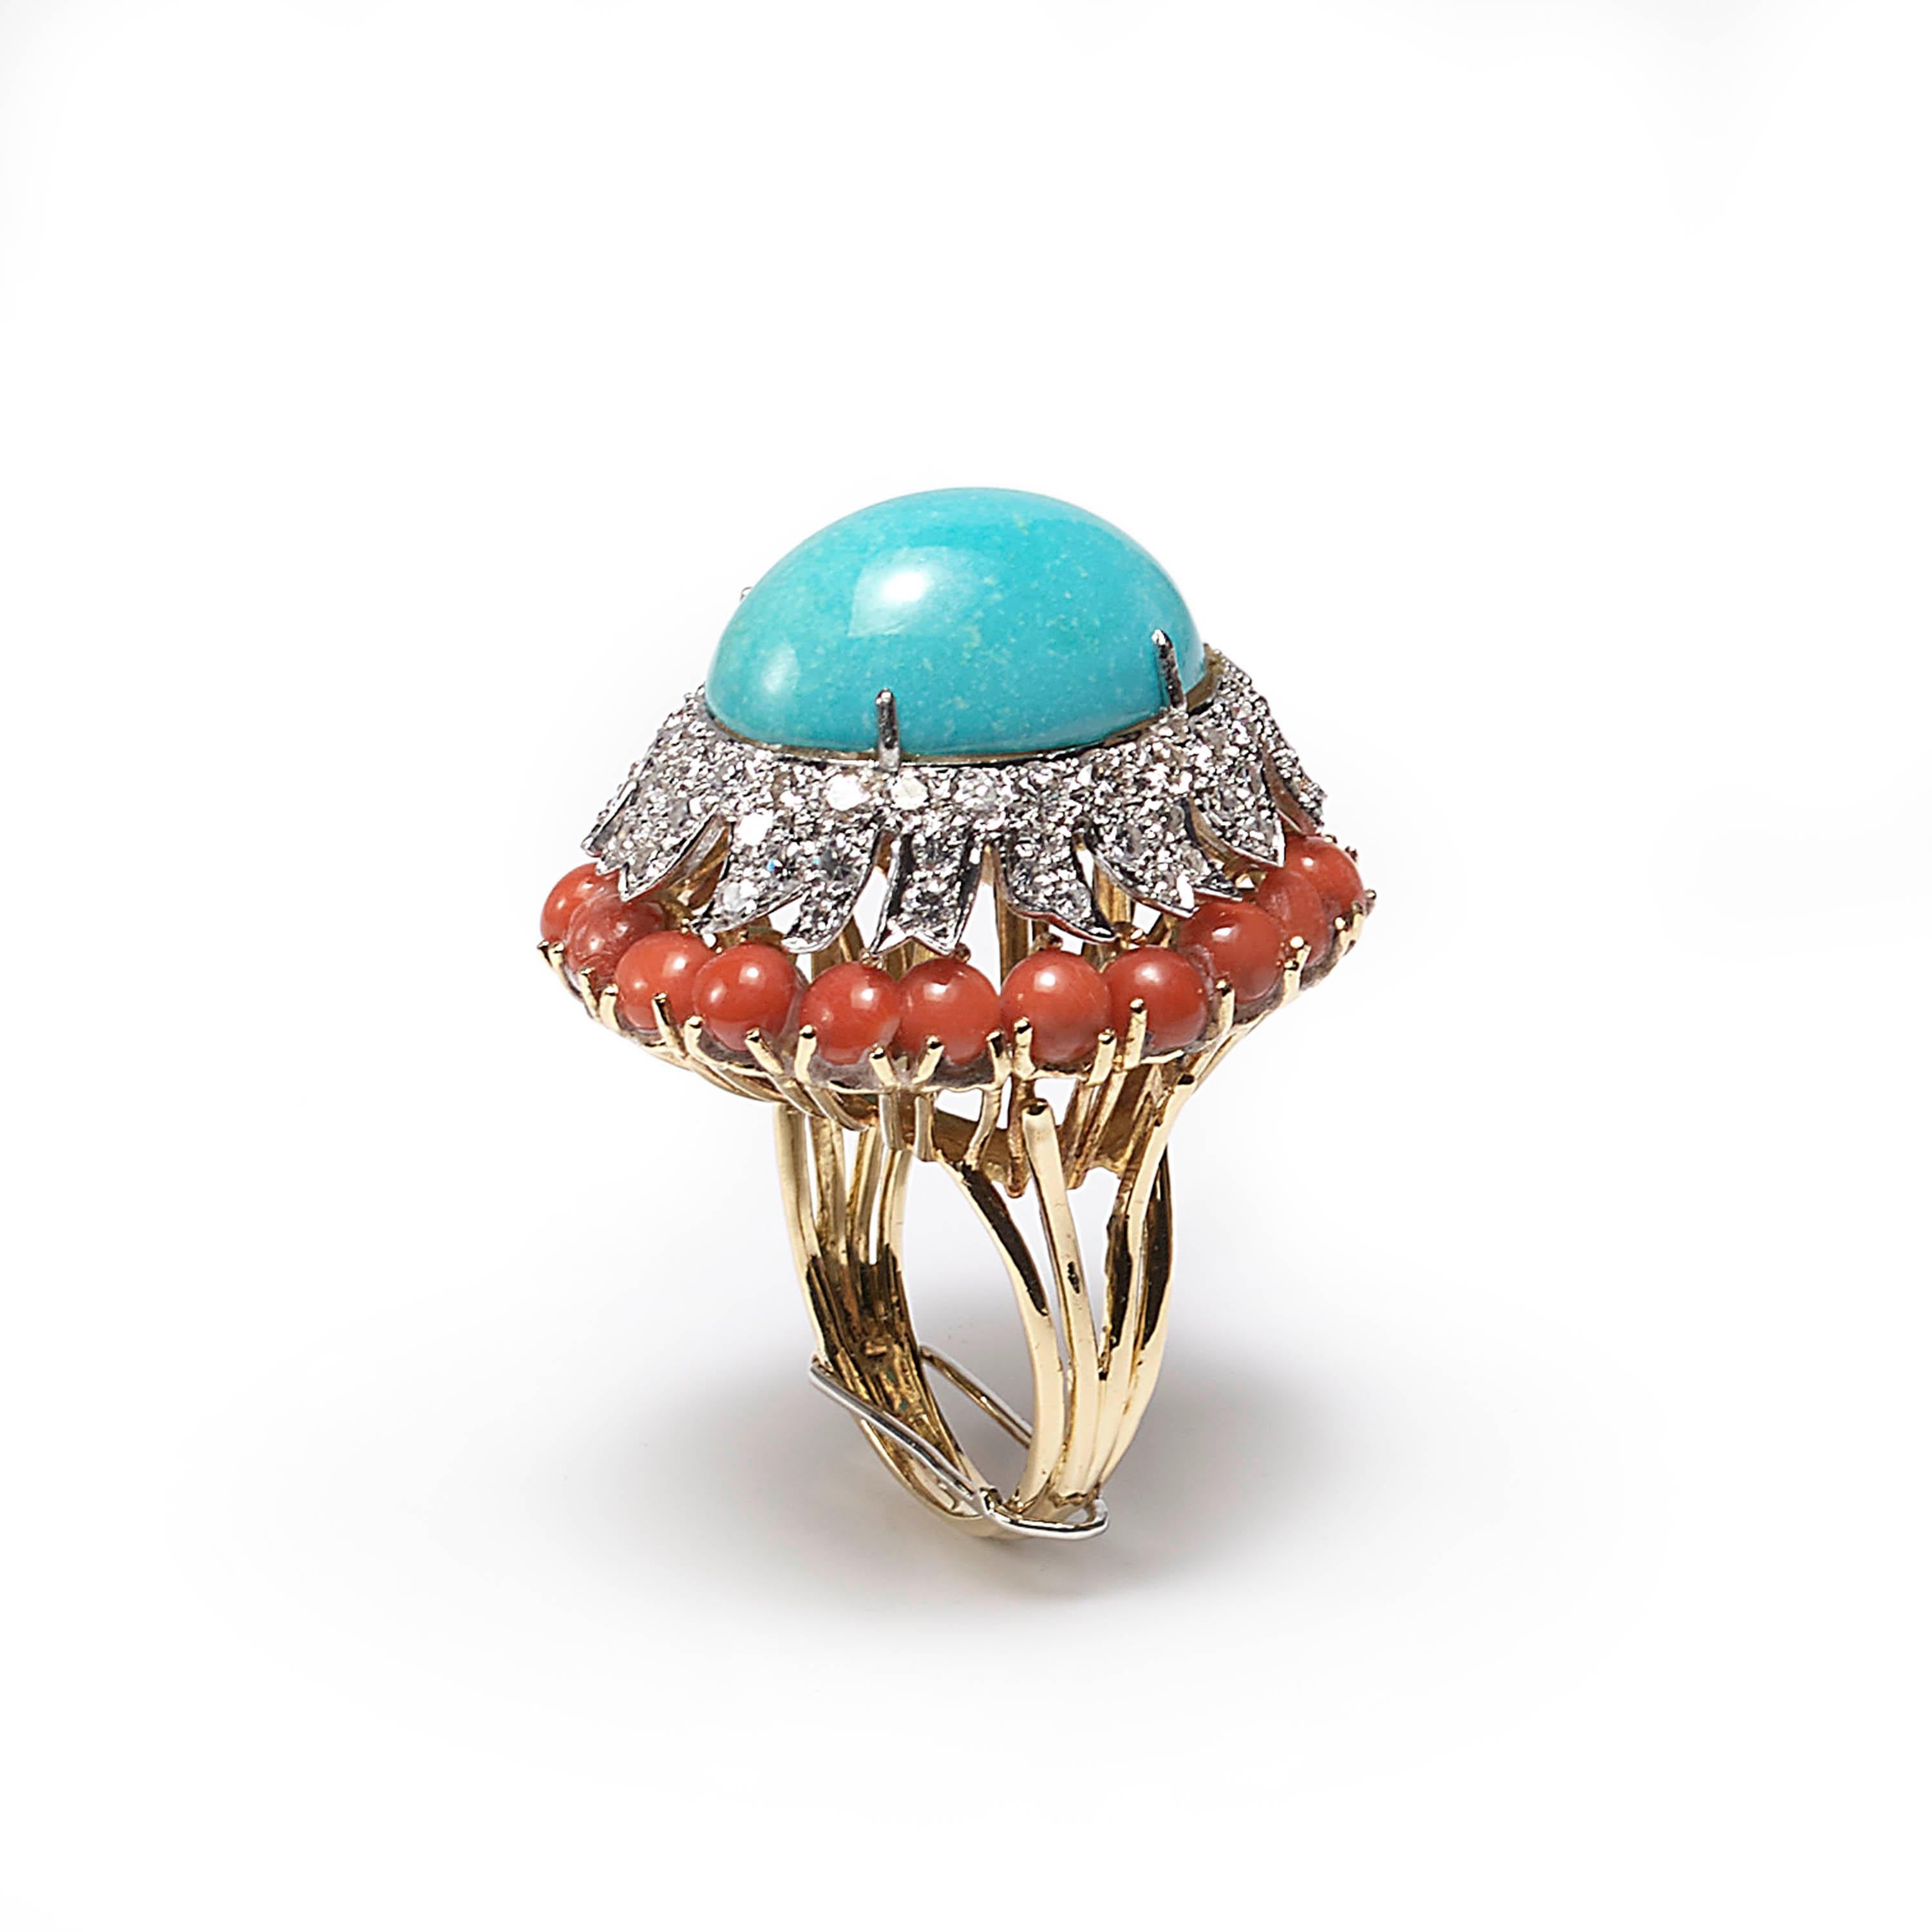 Retro Vintage Van Cleef & Arpels Turquoise, Coral and Diamond Cocktail Ring